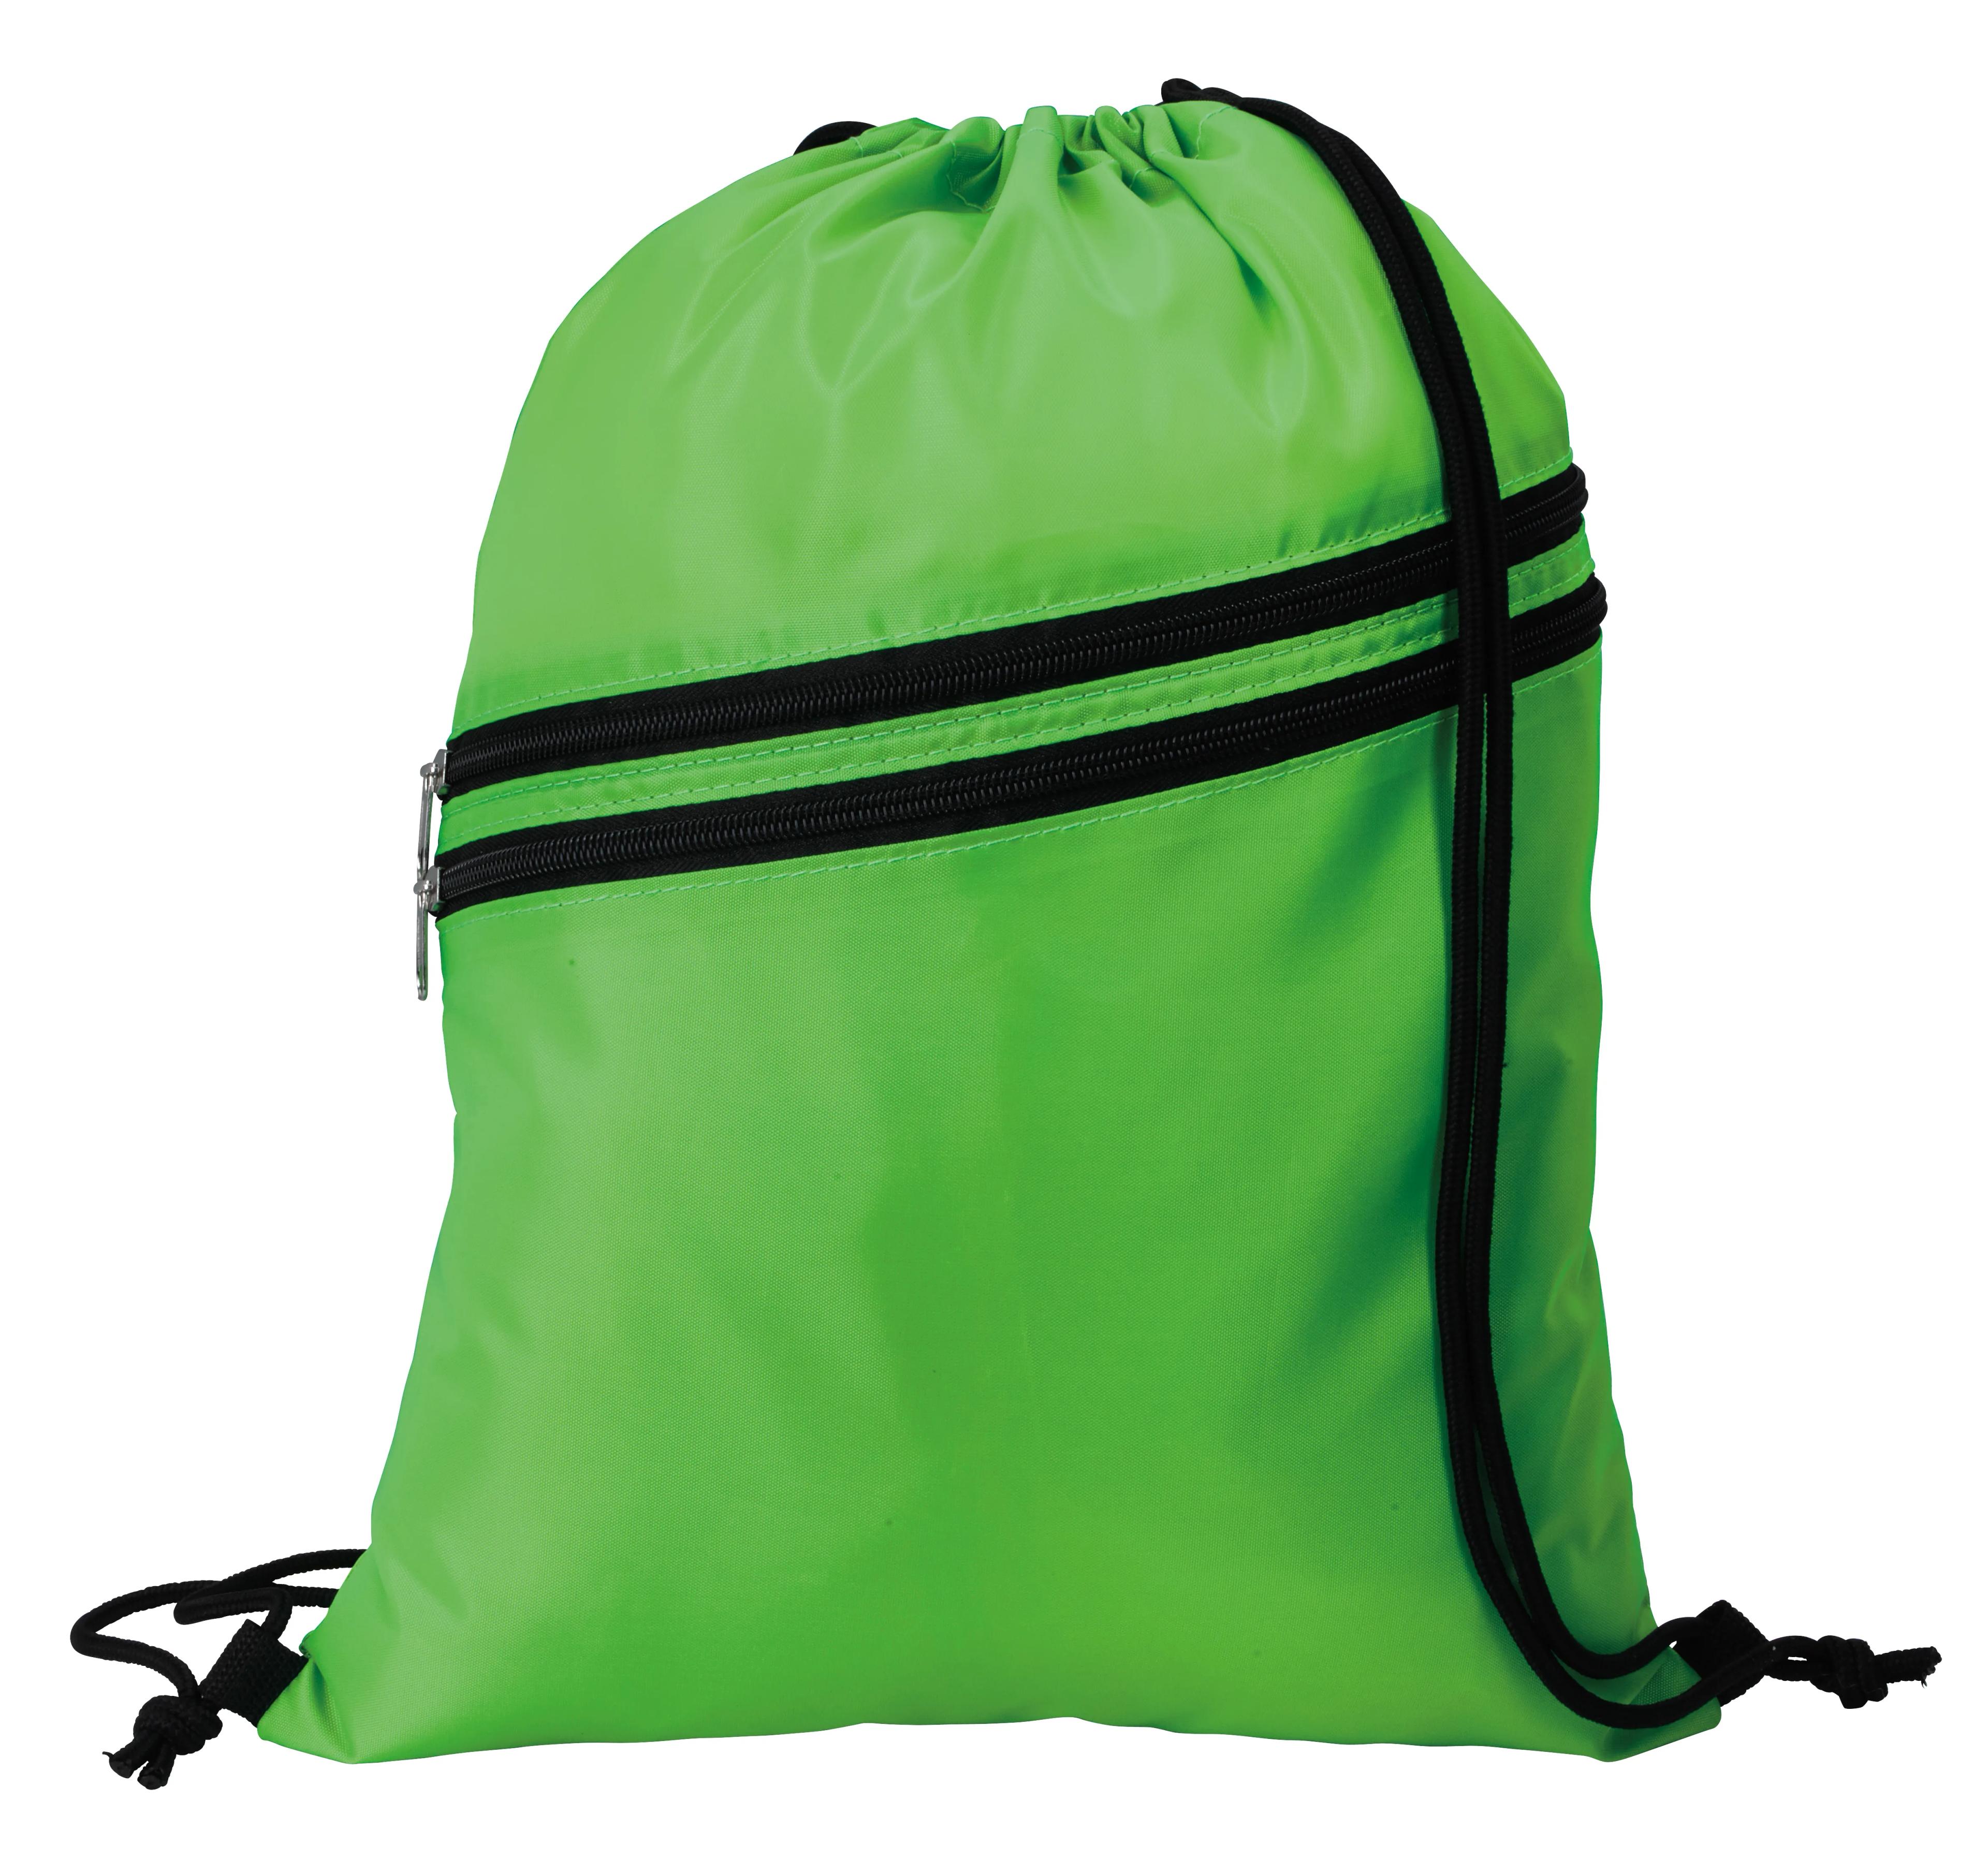 Neon Multi-Zippered Drawstring Backpack 26 of 27